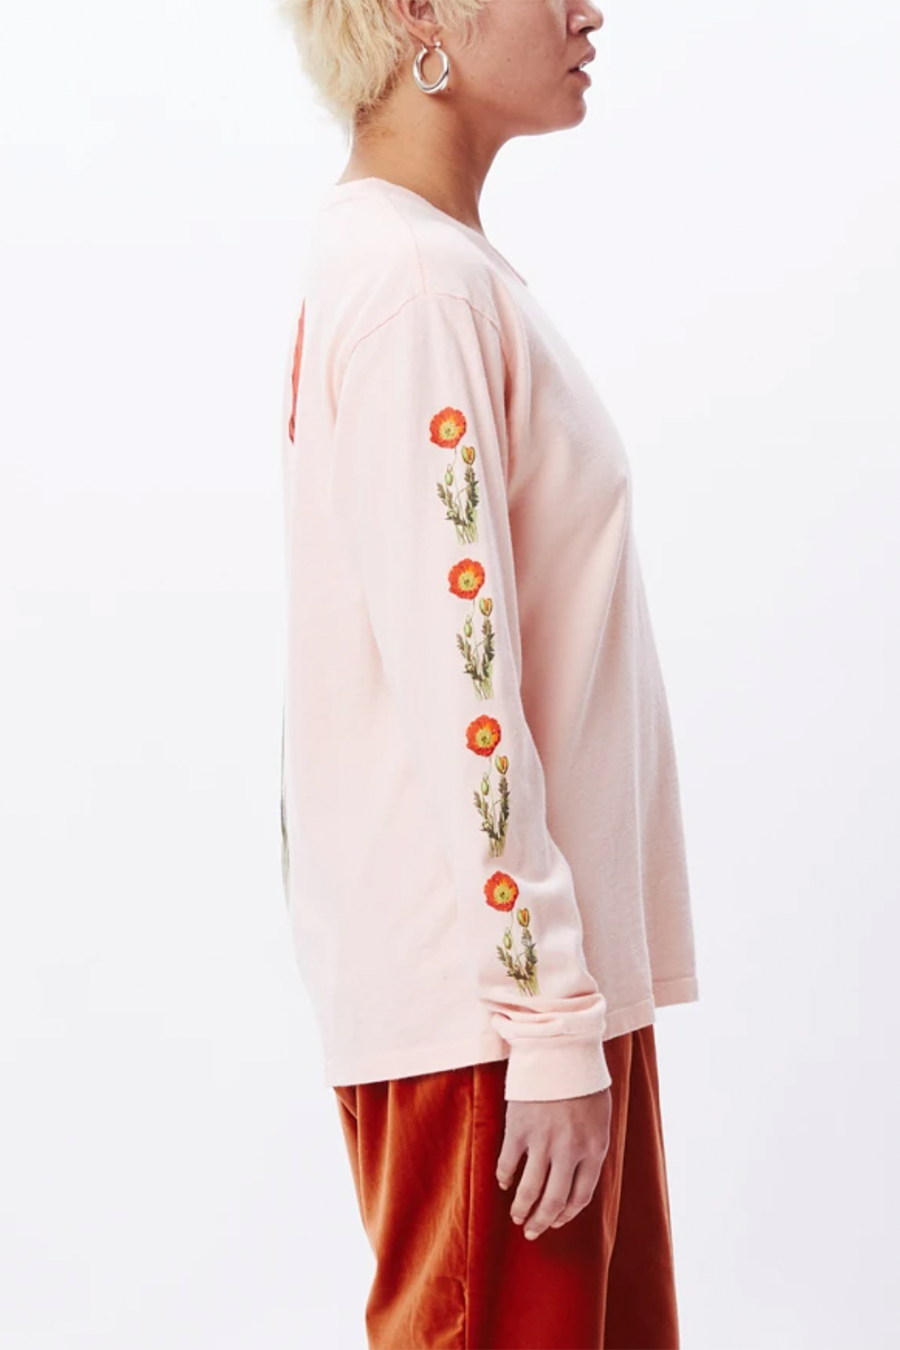 OP Flower Long Sleeve | Putty Pink - Main Image Number 3 of 3